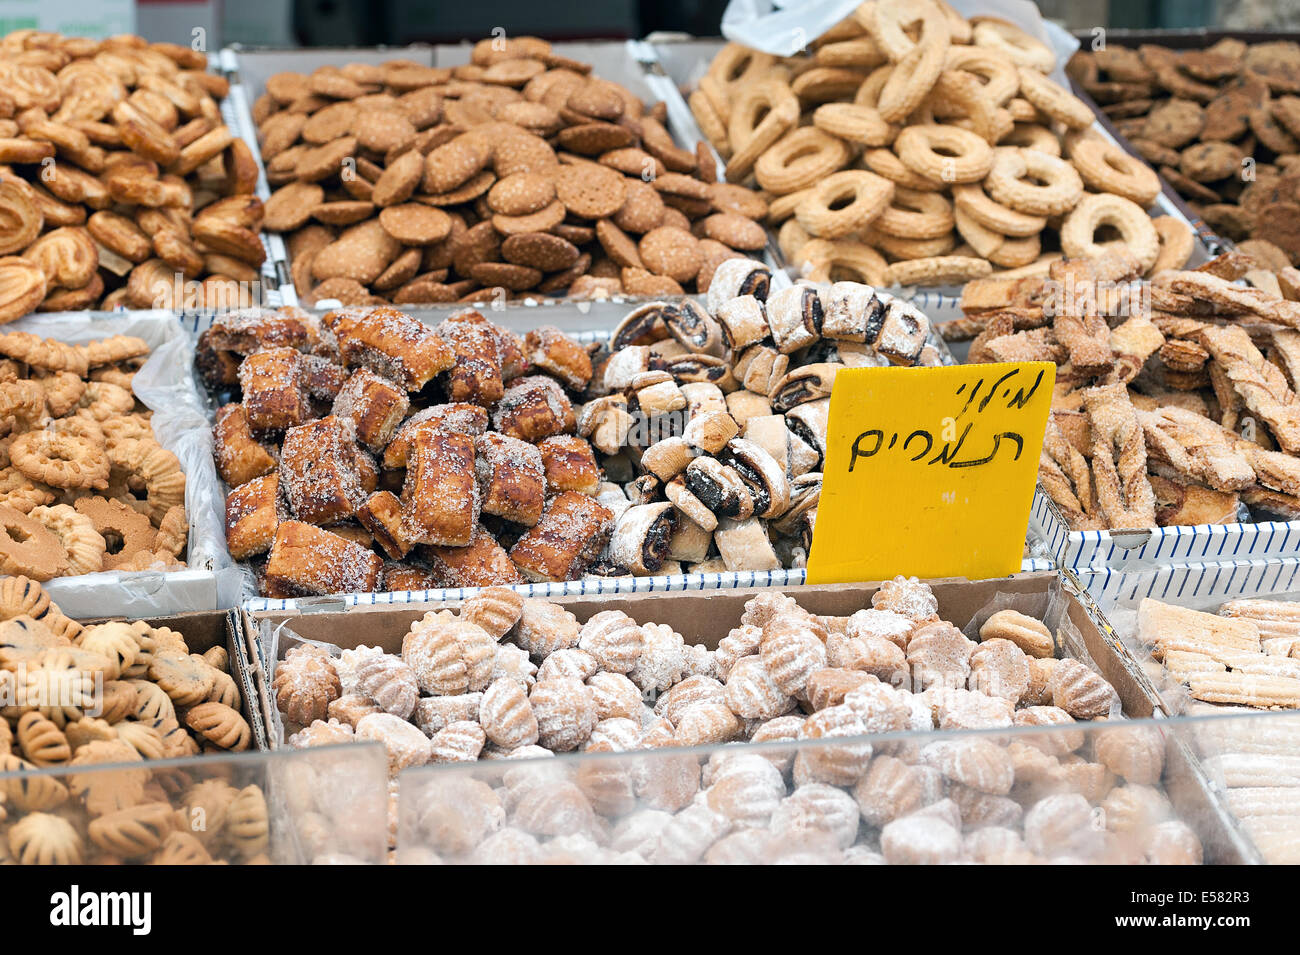 Assortments of pastries and cookies for sale at Machane Yehuda market, Jerusalem, Israel Stock Photo